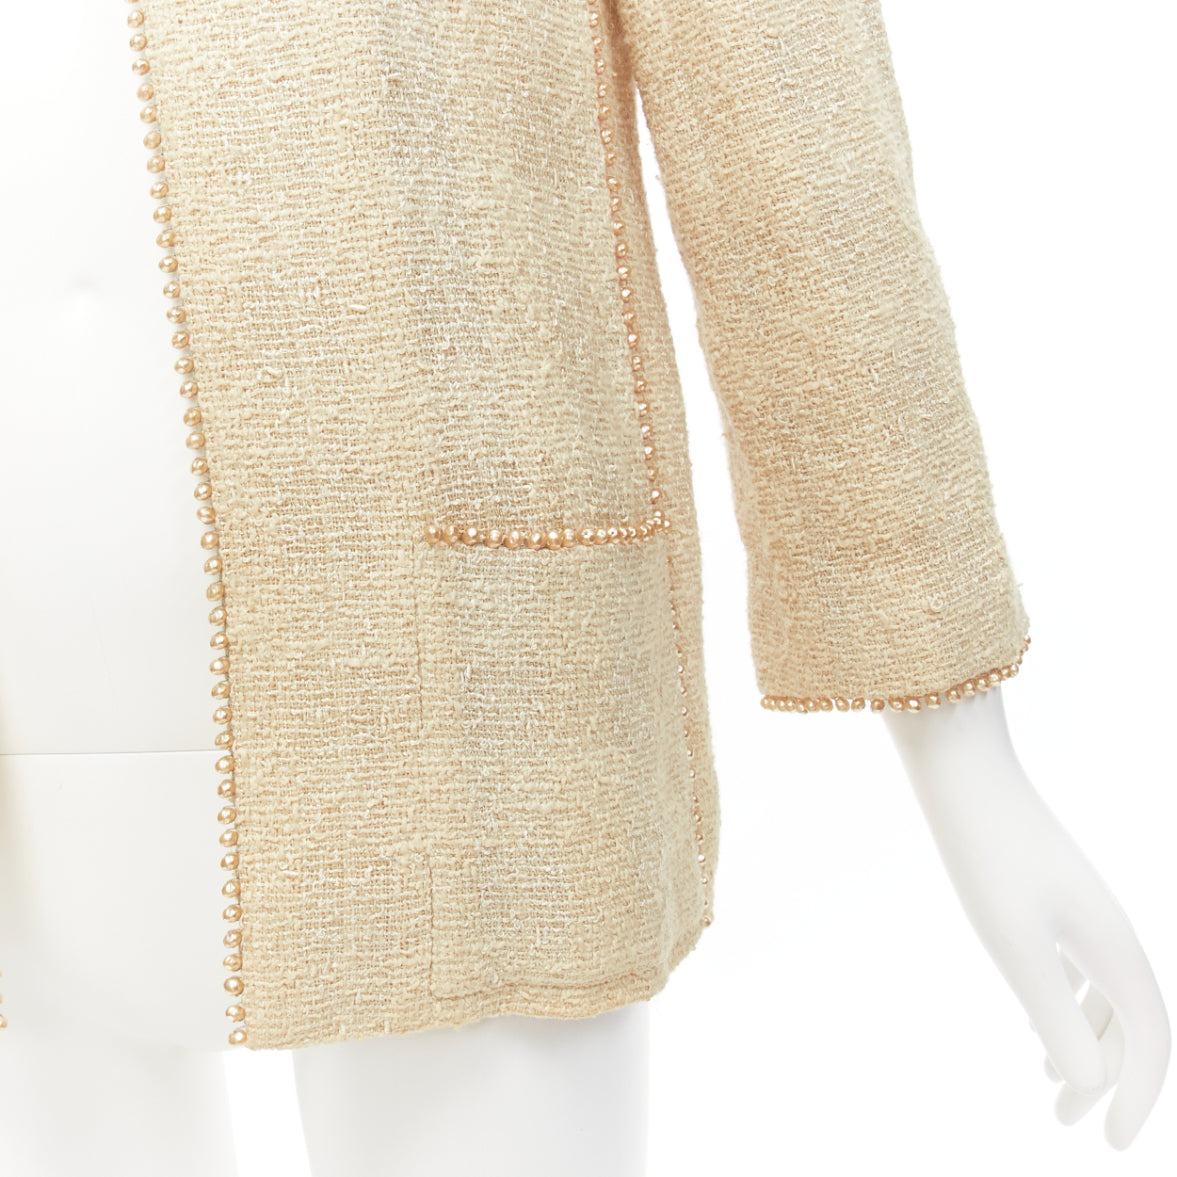 CHANEL Karl Lagerfeld 99P Vintage pearl trim boucle tweed jacket FR40 L
Reference: TGAS/D00799
Brand: Chanel
Designer: Karl Lagerfeld
Collection: 99P
Material: Cotton, Blend
Color: Beige, Pearl
Pattern: Tweed
Closure: Hook & Eye
Lining: Cream